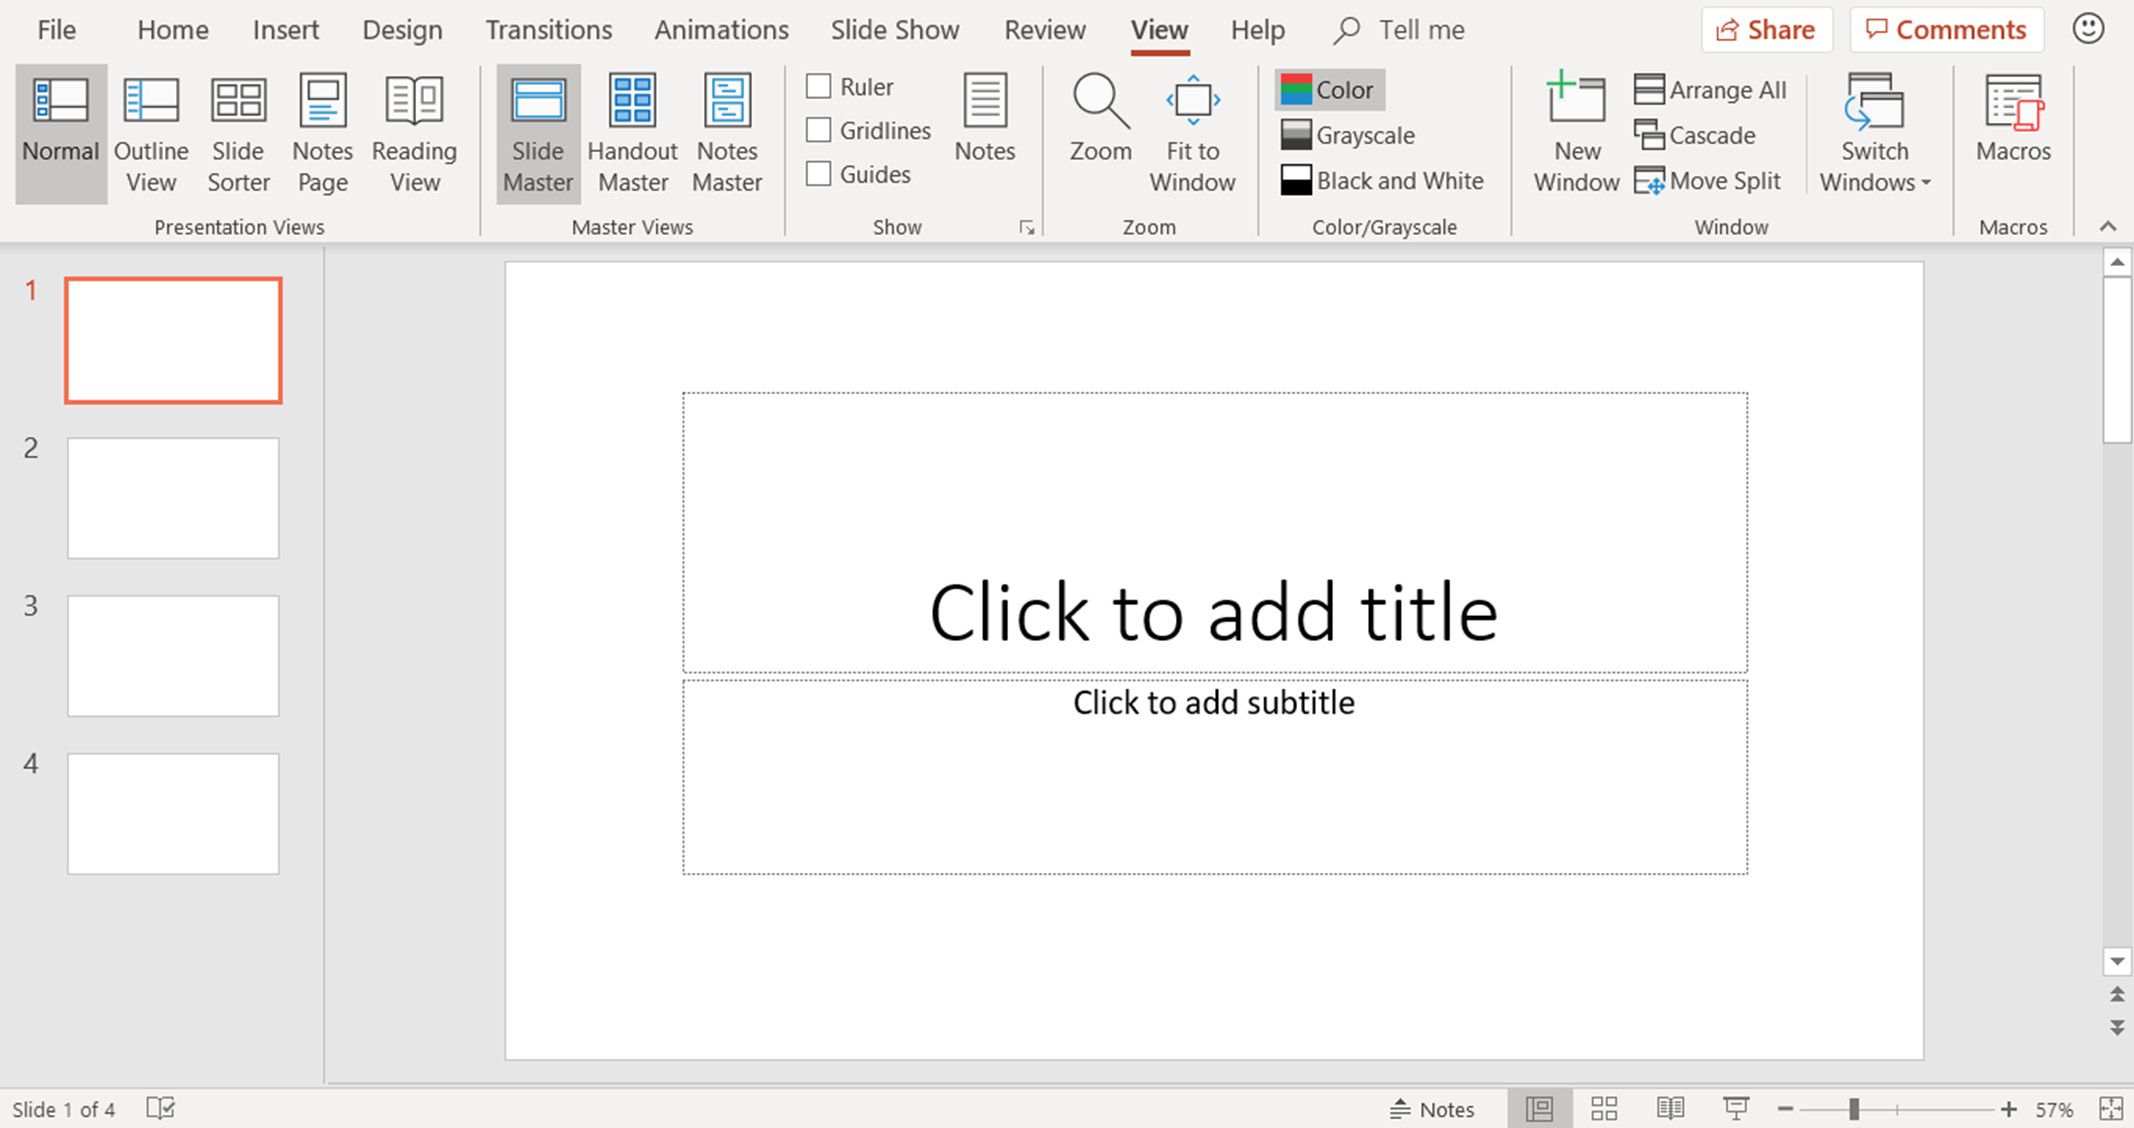 word 2016 for mac use style pane